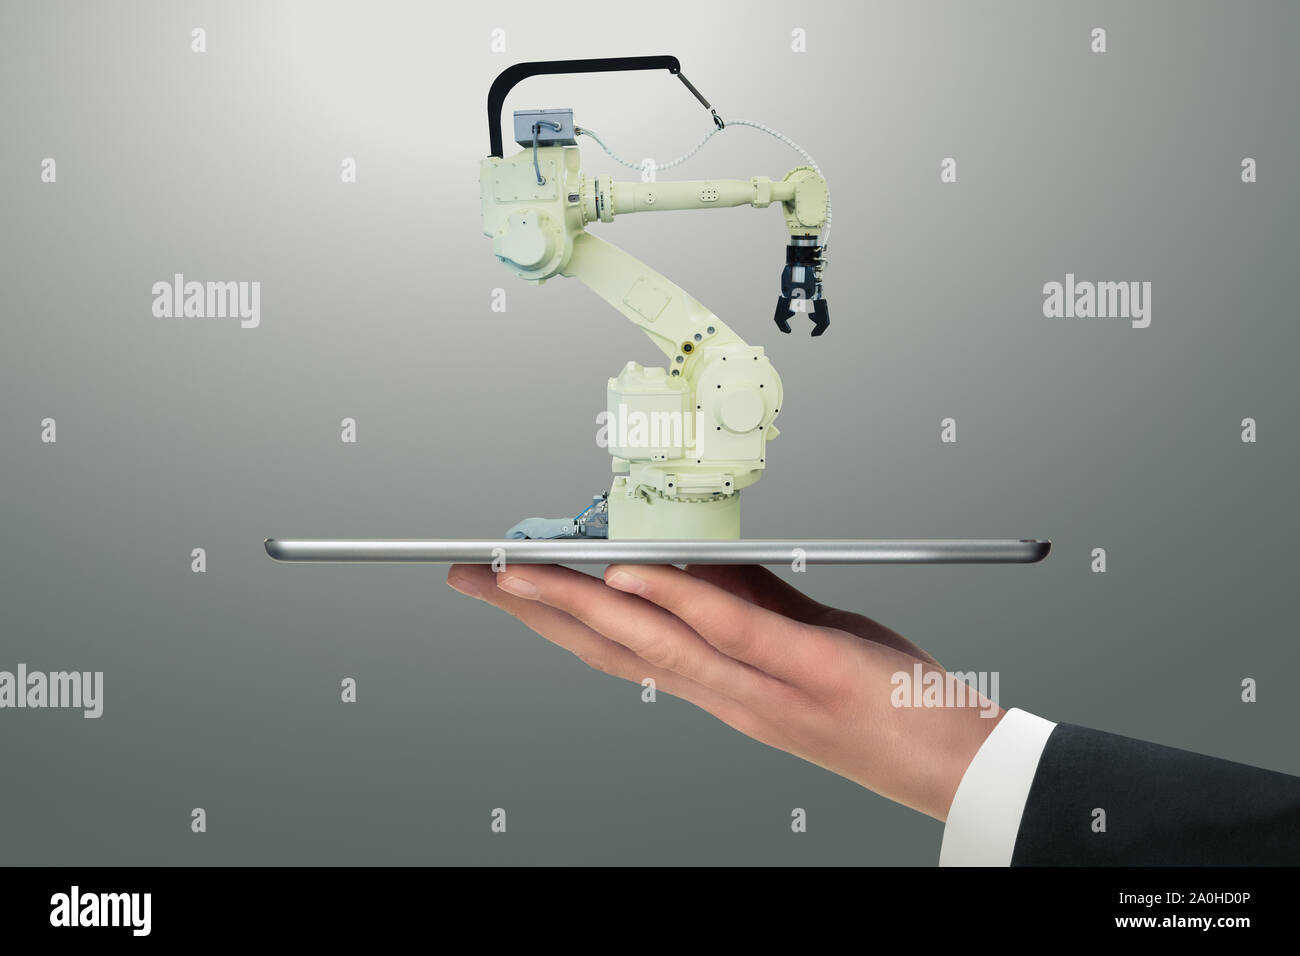 Man holding a digital tablet with handling robot with robotic arm. Stock Photo